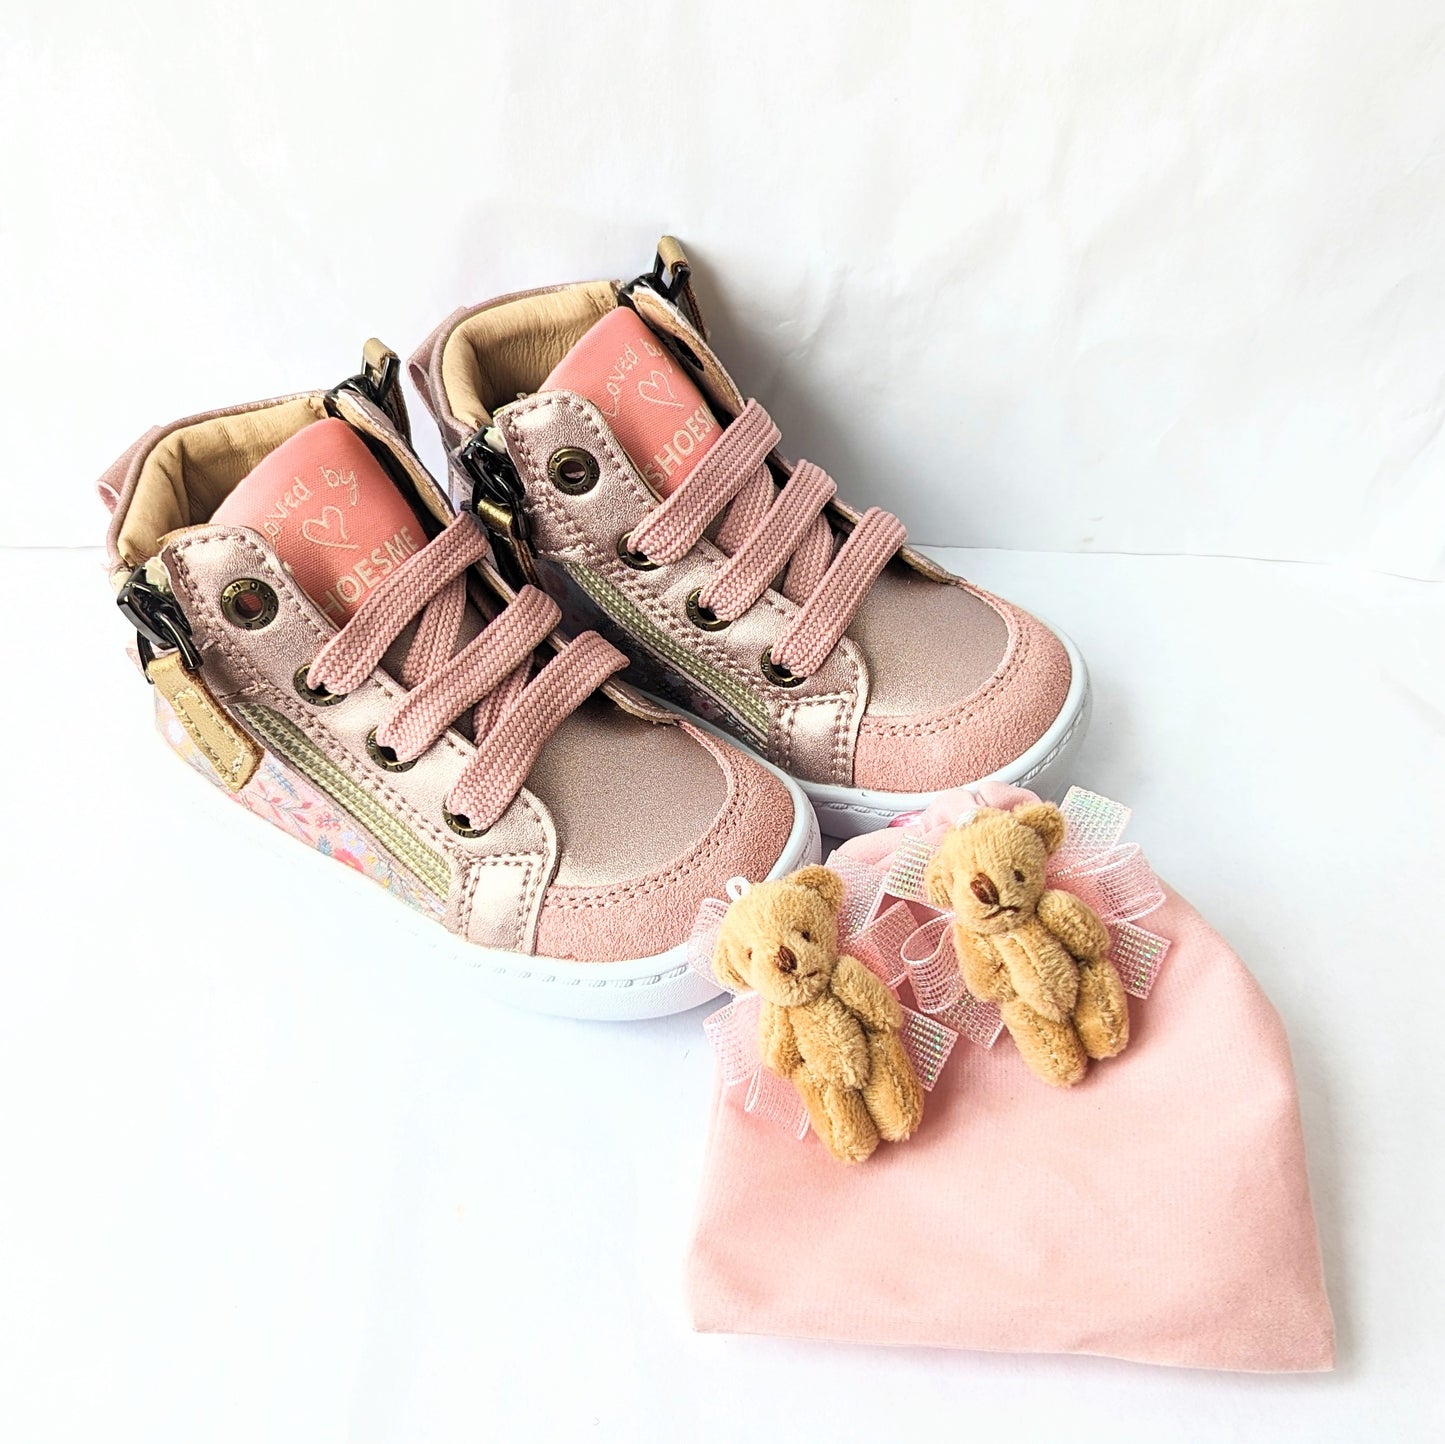 Shoesme  | FL23W008-B | Girls Boot | Rose Gold with Teddy Bear